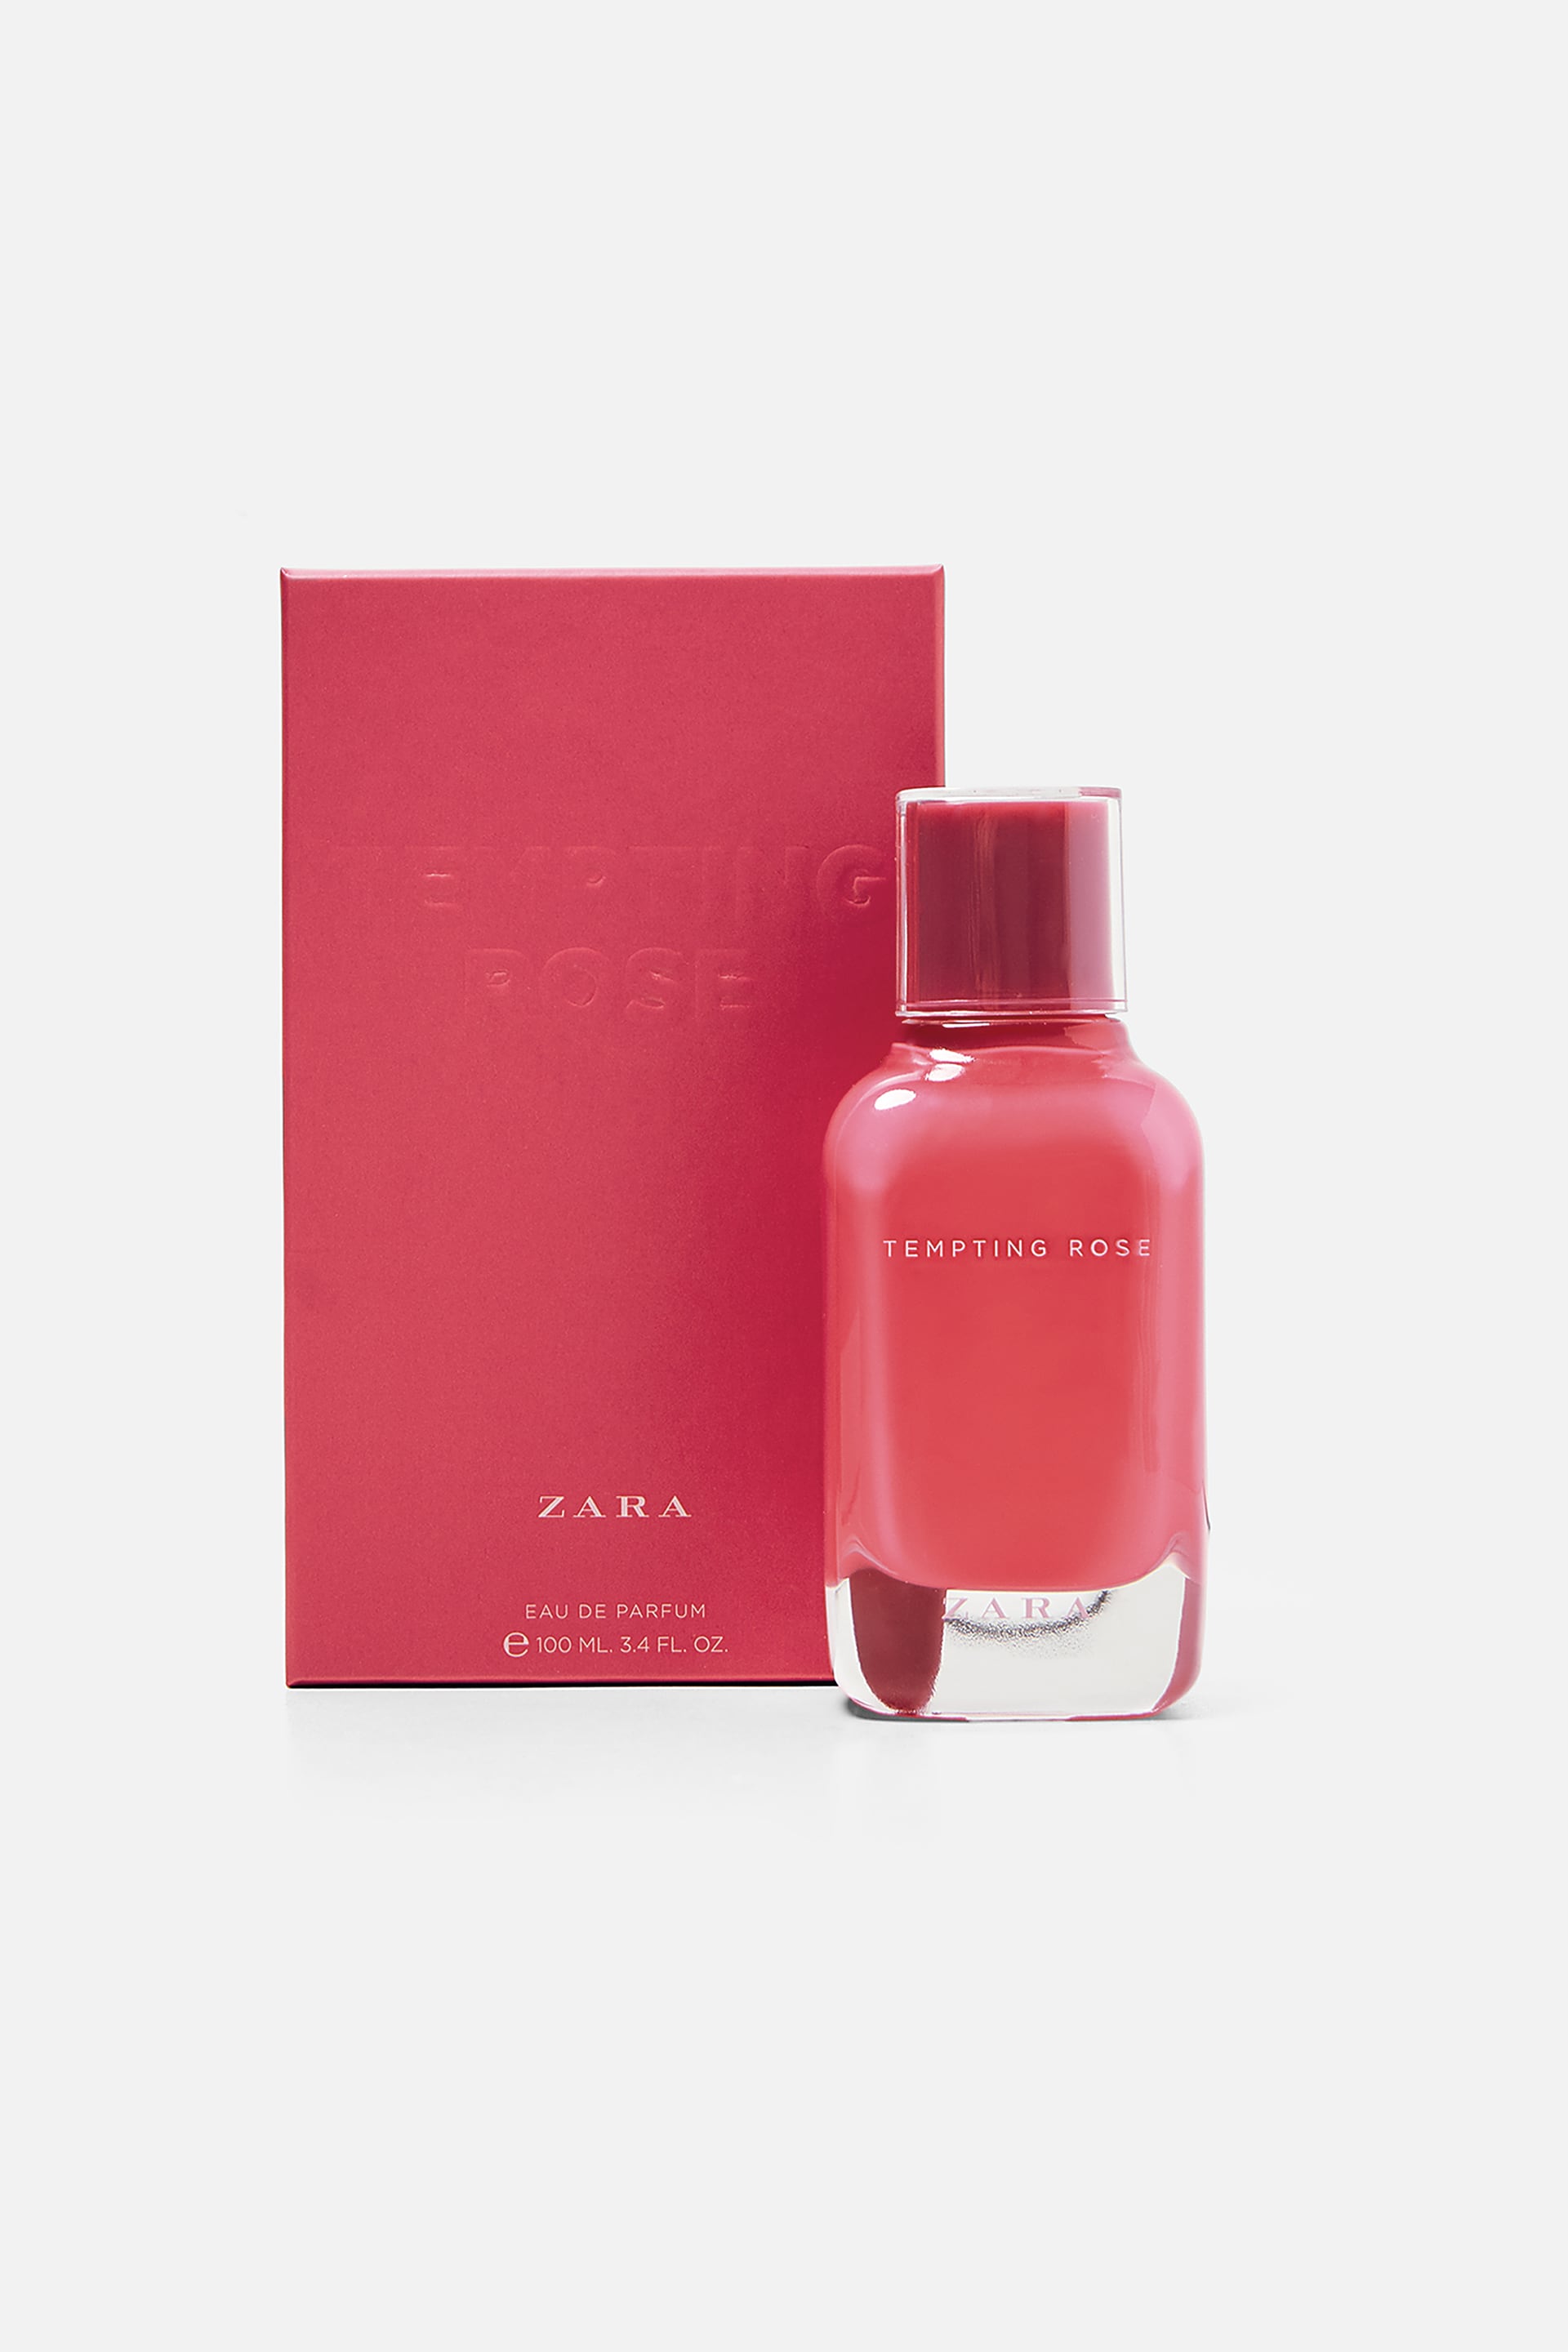 Tempting Rose by Zara is a Floral Fruity Gourmand fragrance for women. 